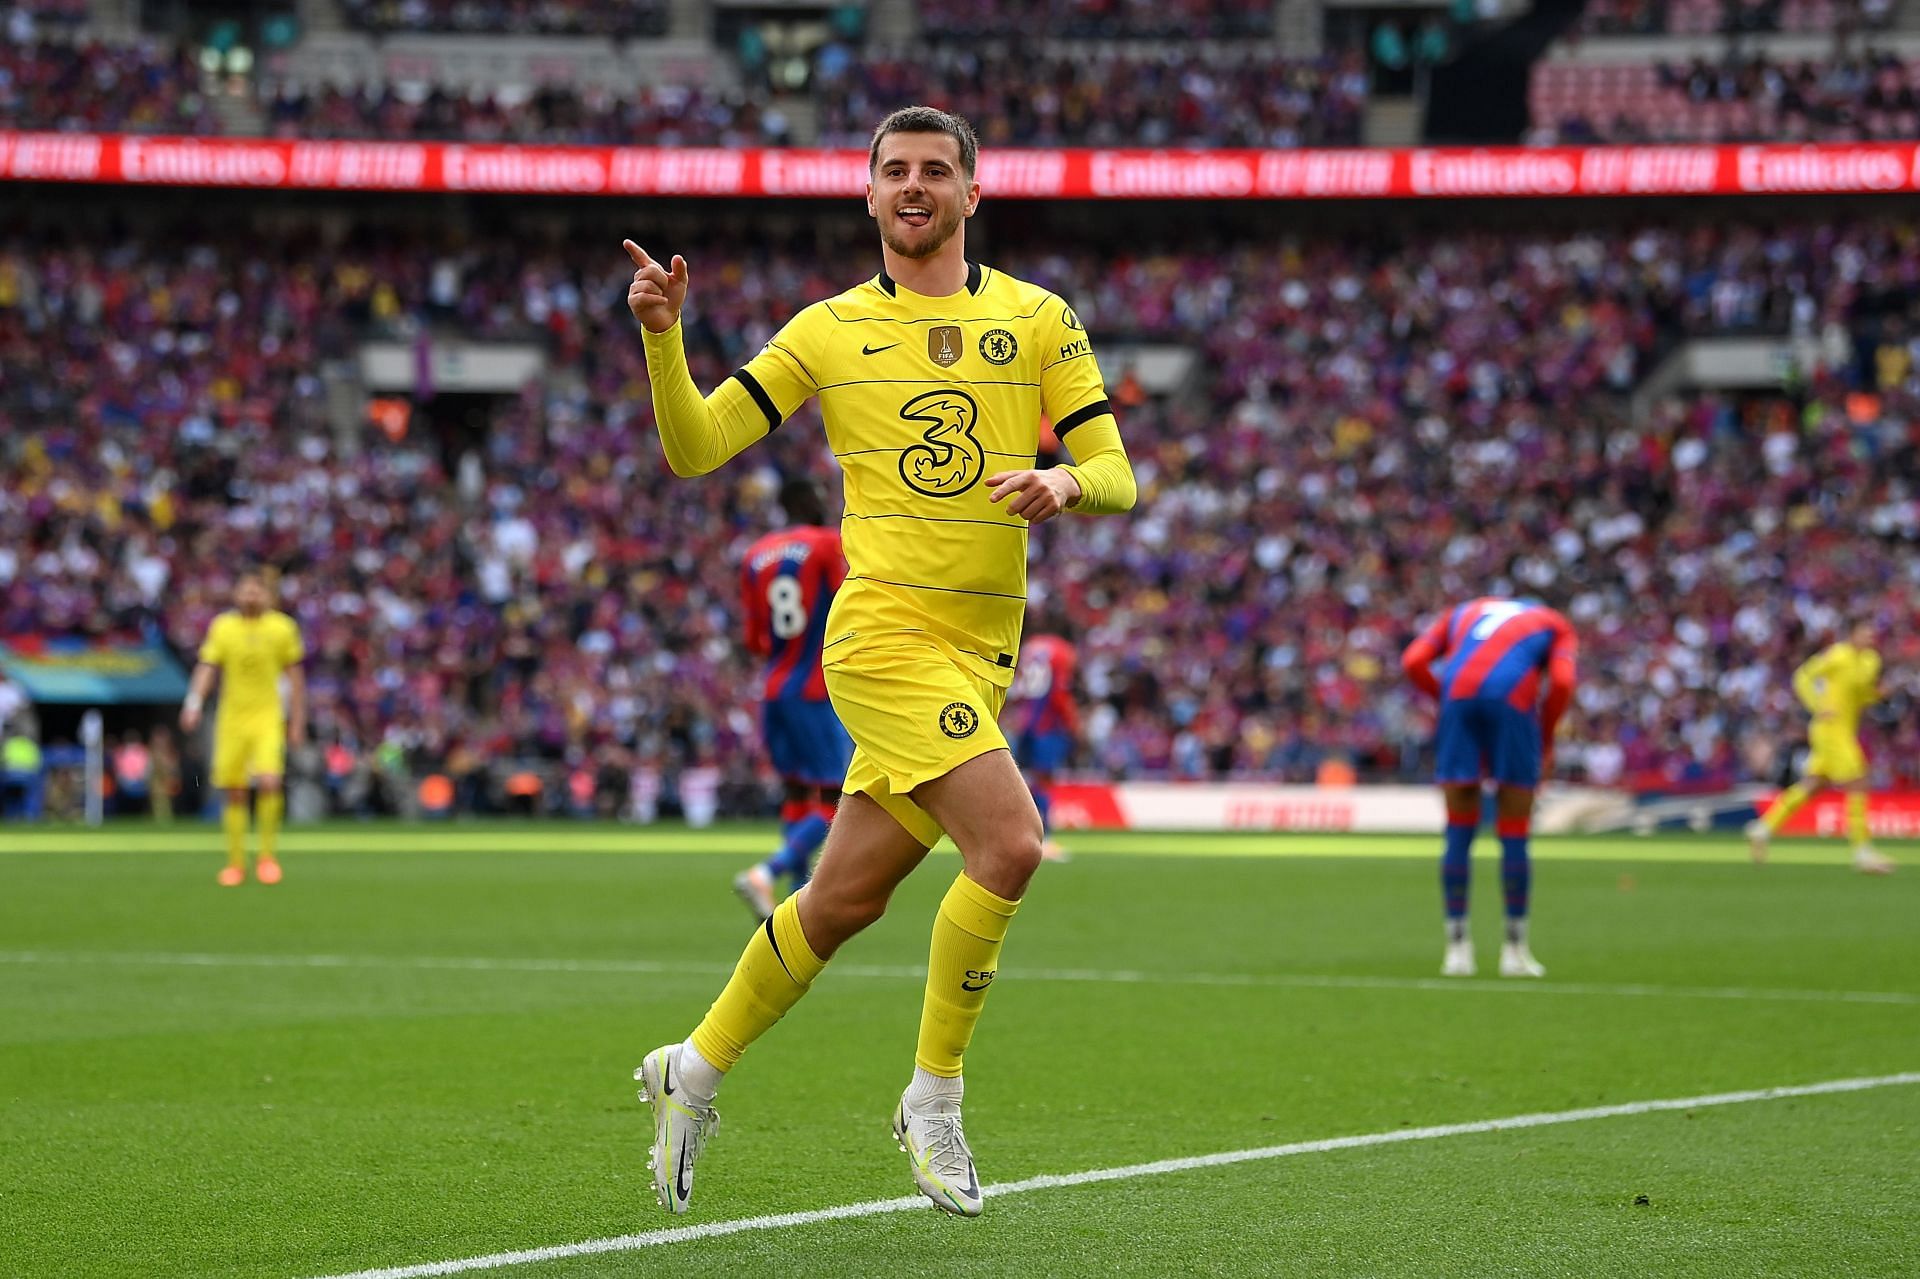 Mason Mount of Chelsea celebrates his goal in the FA Cup semi-final against Crystal Palace